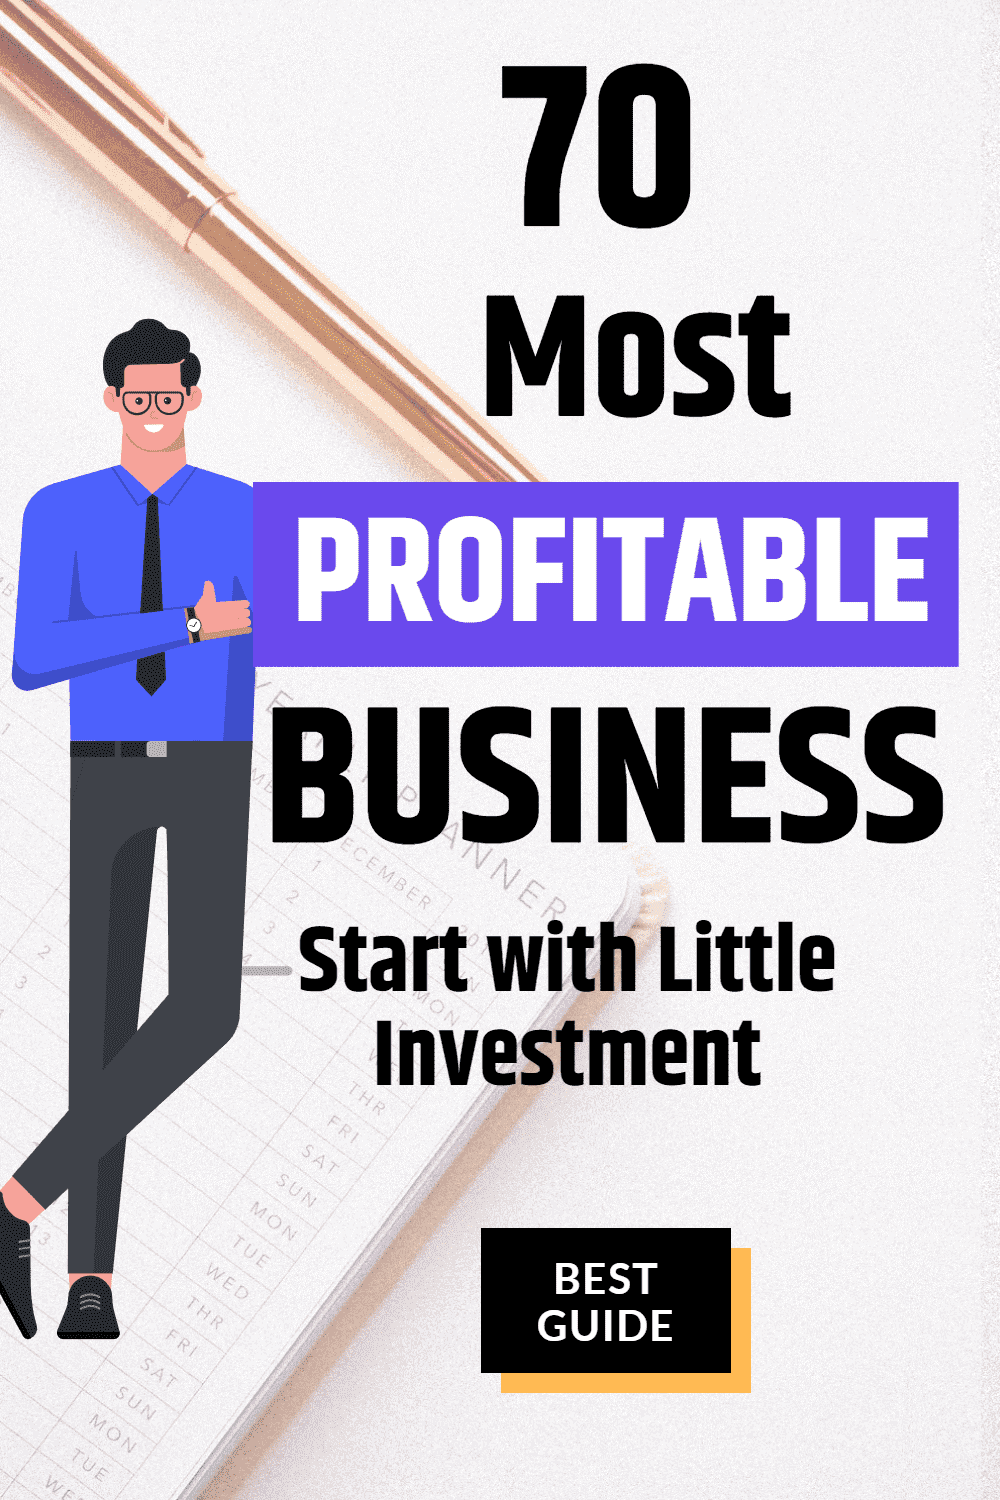 70 Most Profitable Businesses {Start with Little Investment}